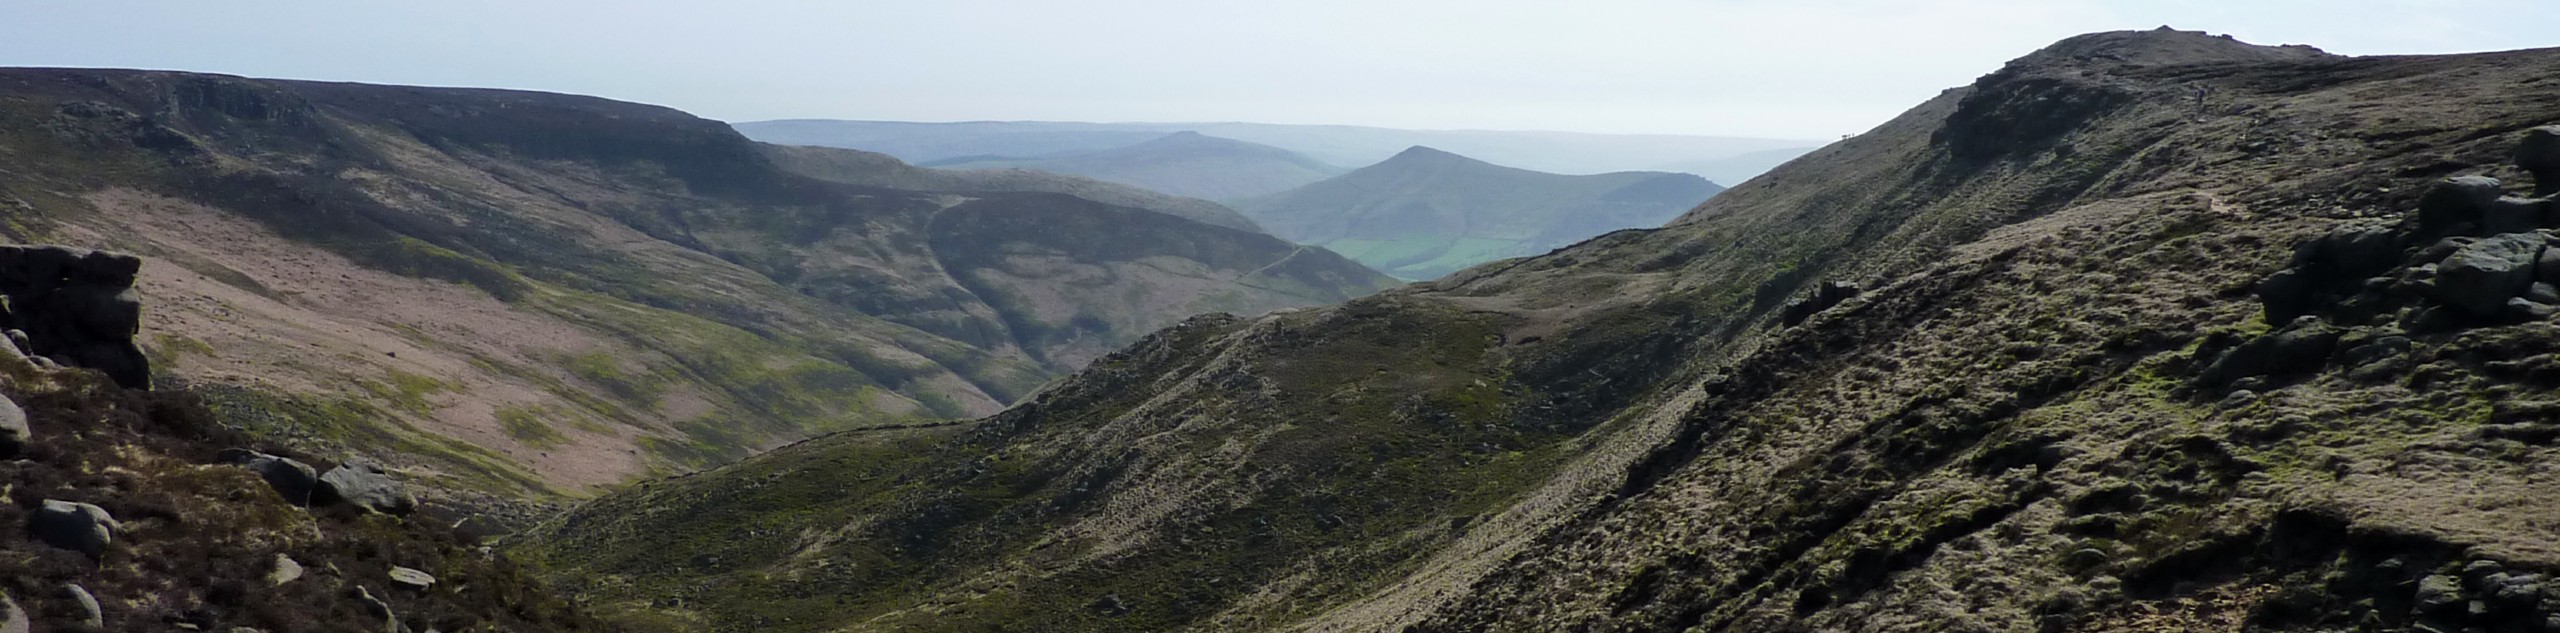 Jacobs Ladder and Edale Circular